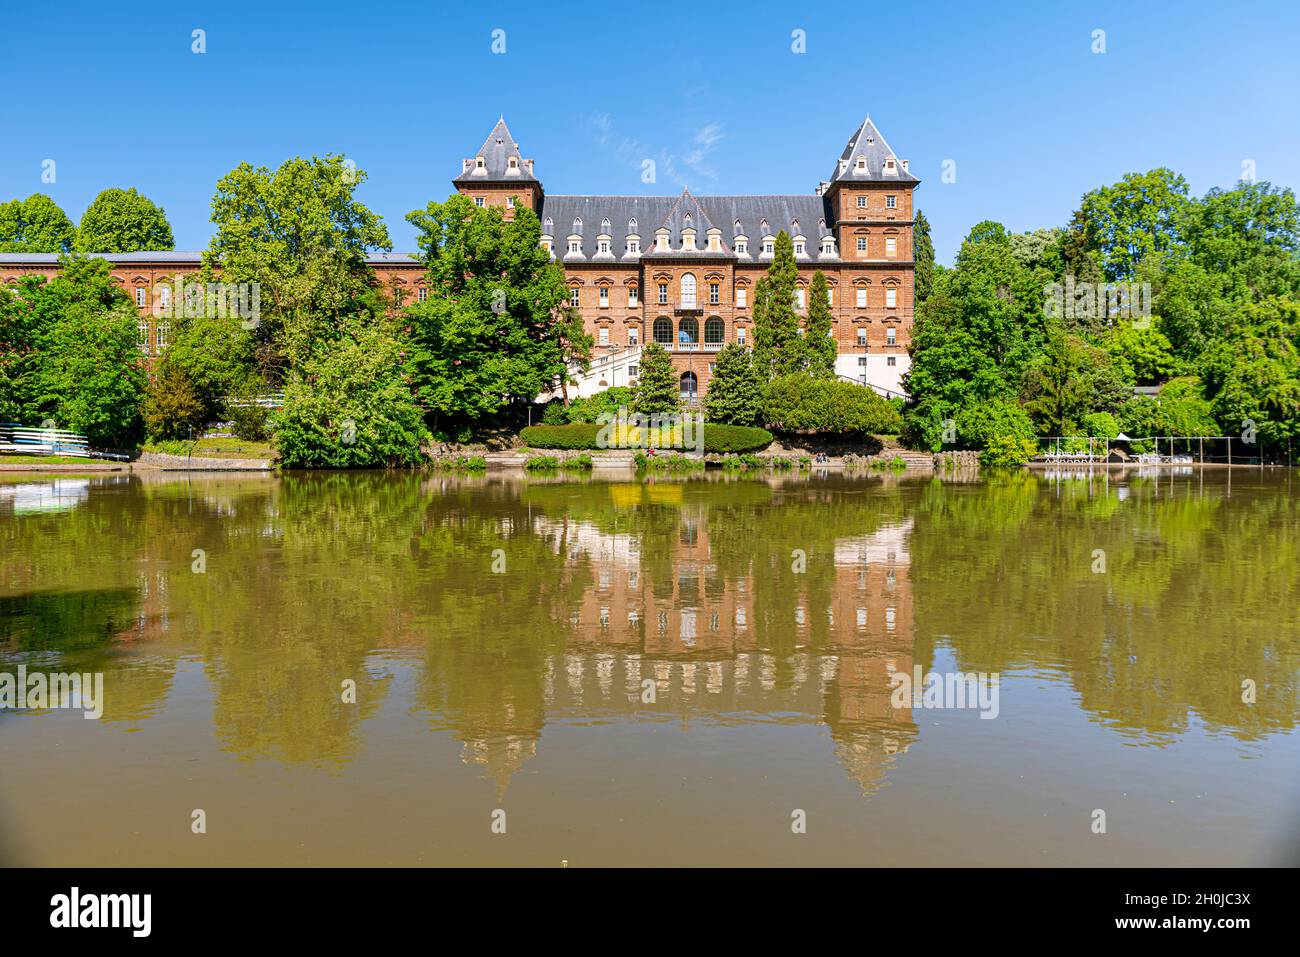 Turin, Italy. May 12th, 2021. The Valentino Castle is an ancient Savoy residence, as well as a historic building in Turin located in the Valentino Par Stock Photo